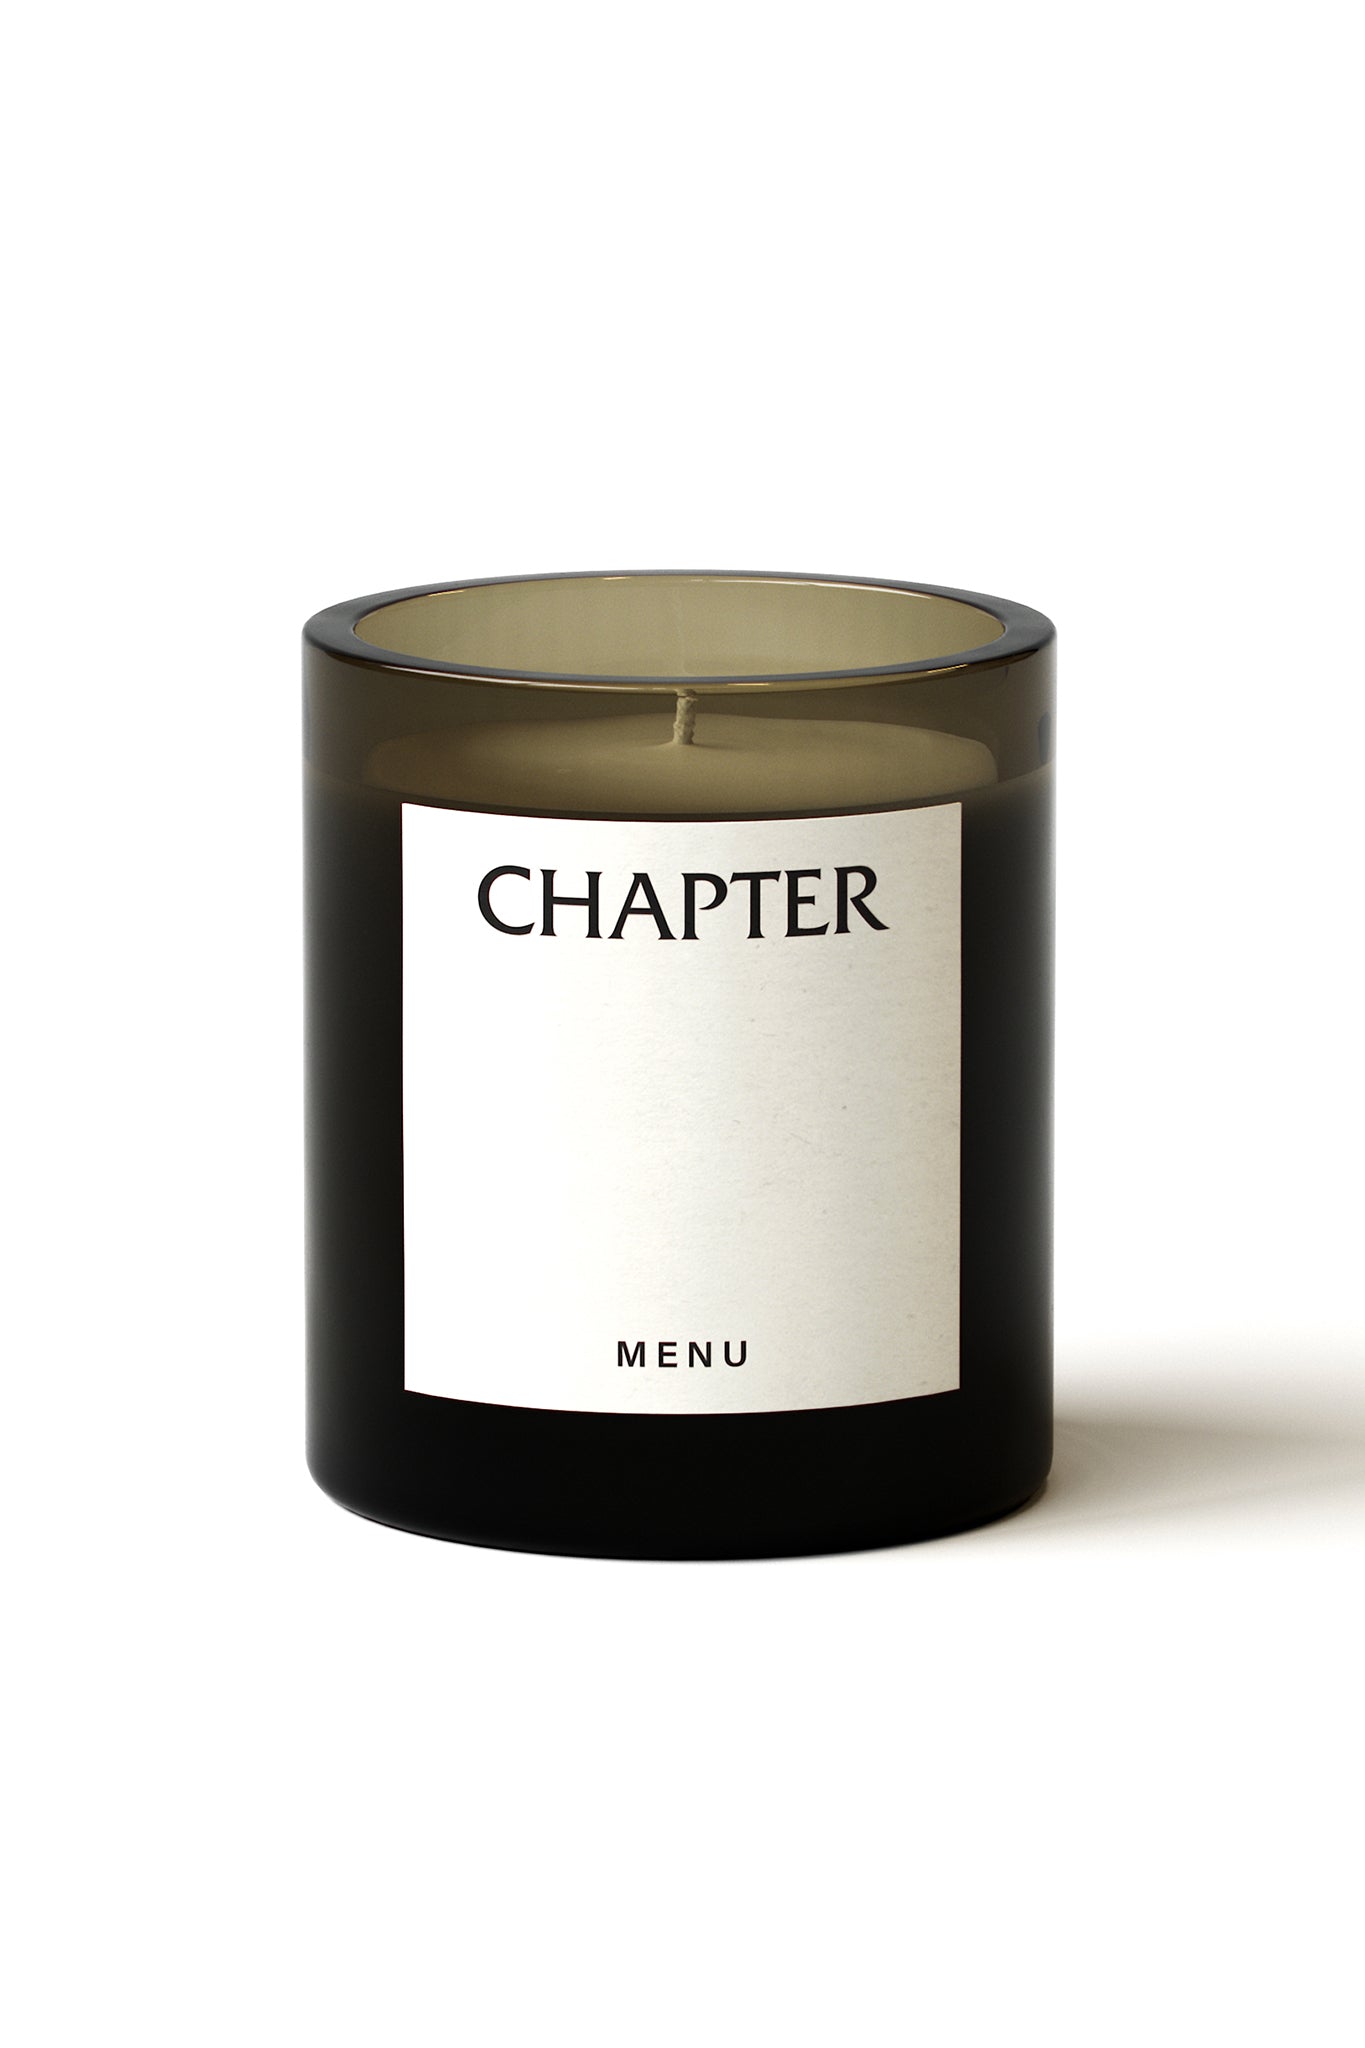 Menu Olfacte Scented Candle, Chapter_235 GR/8.3OZ,